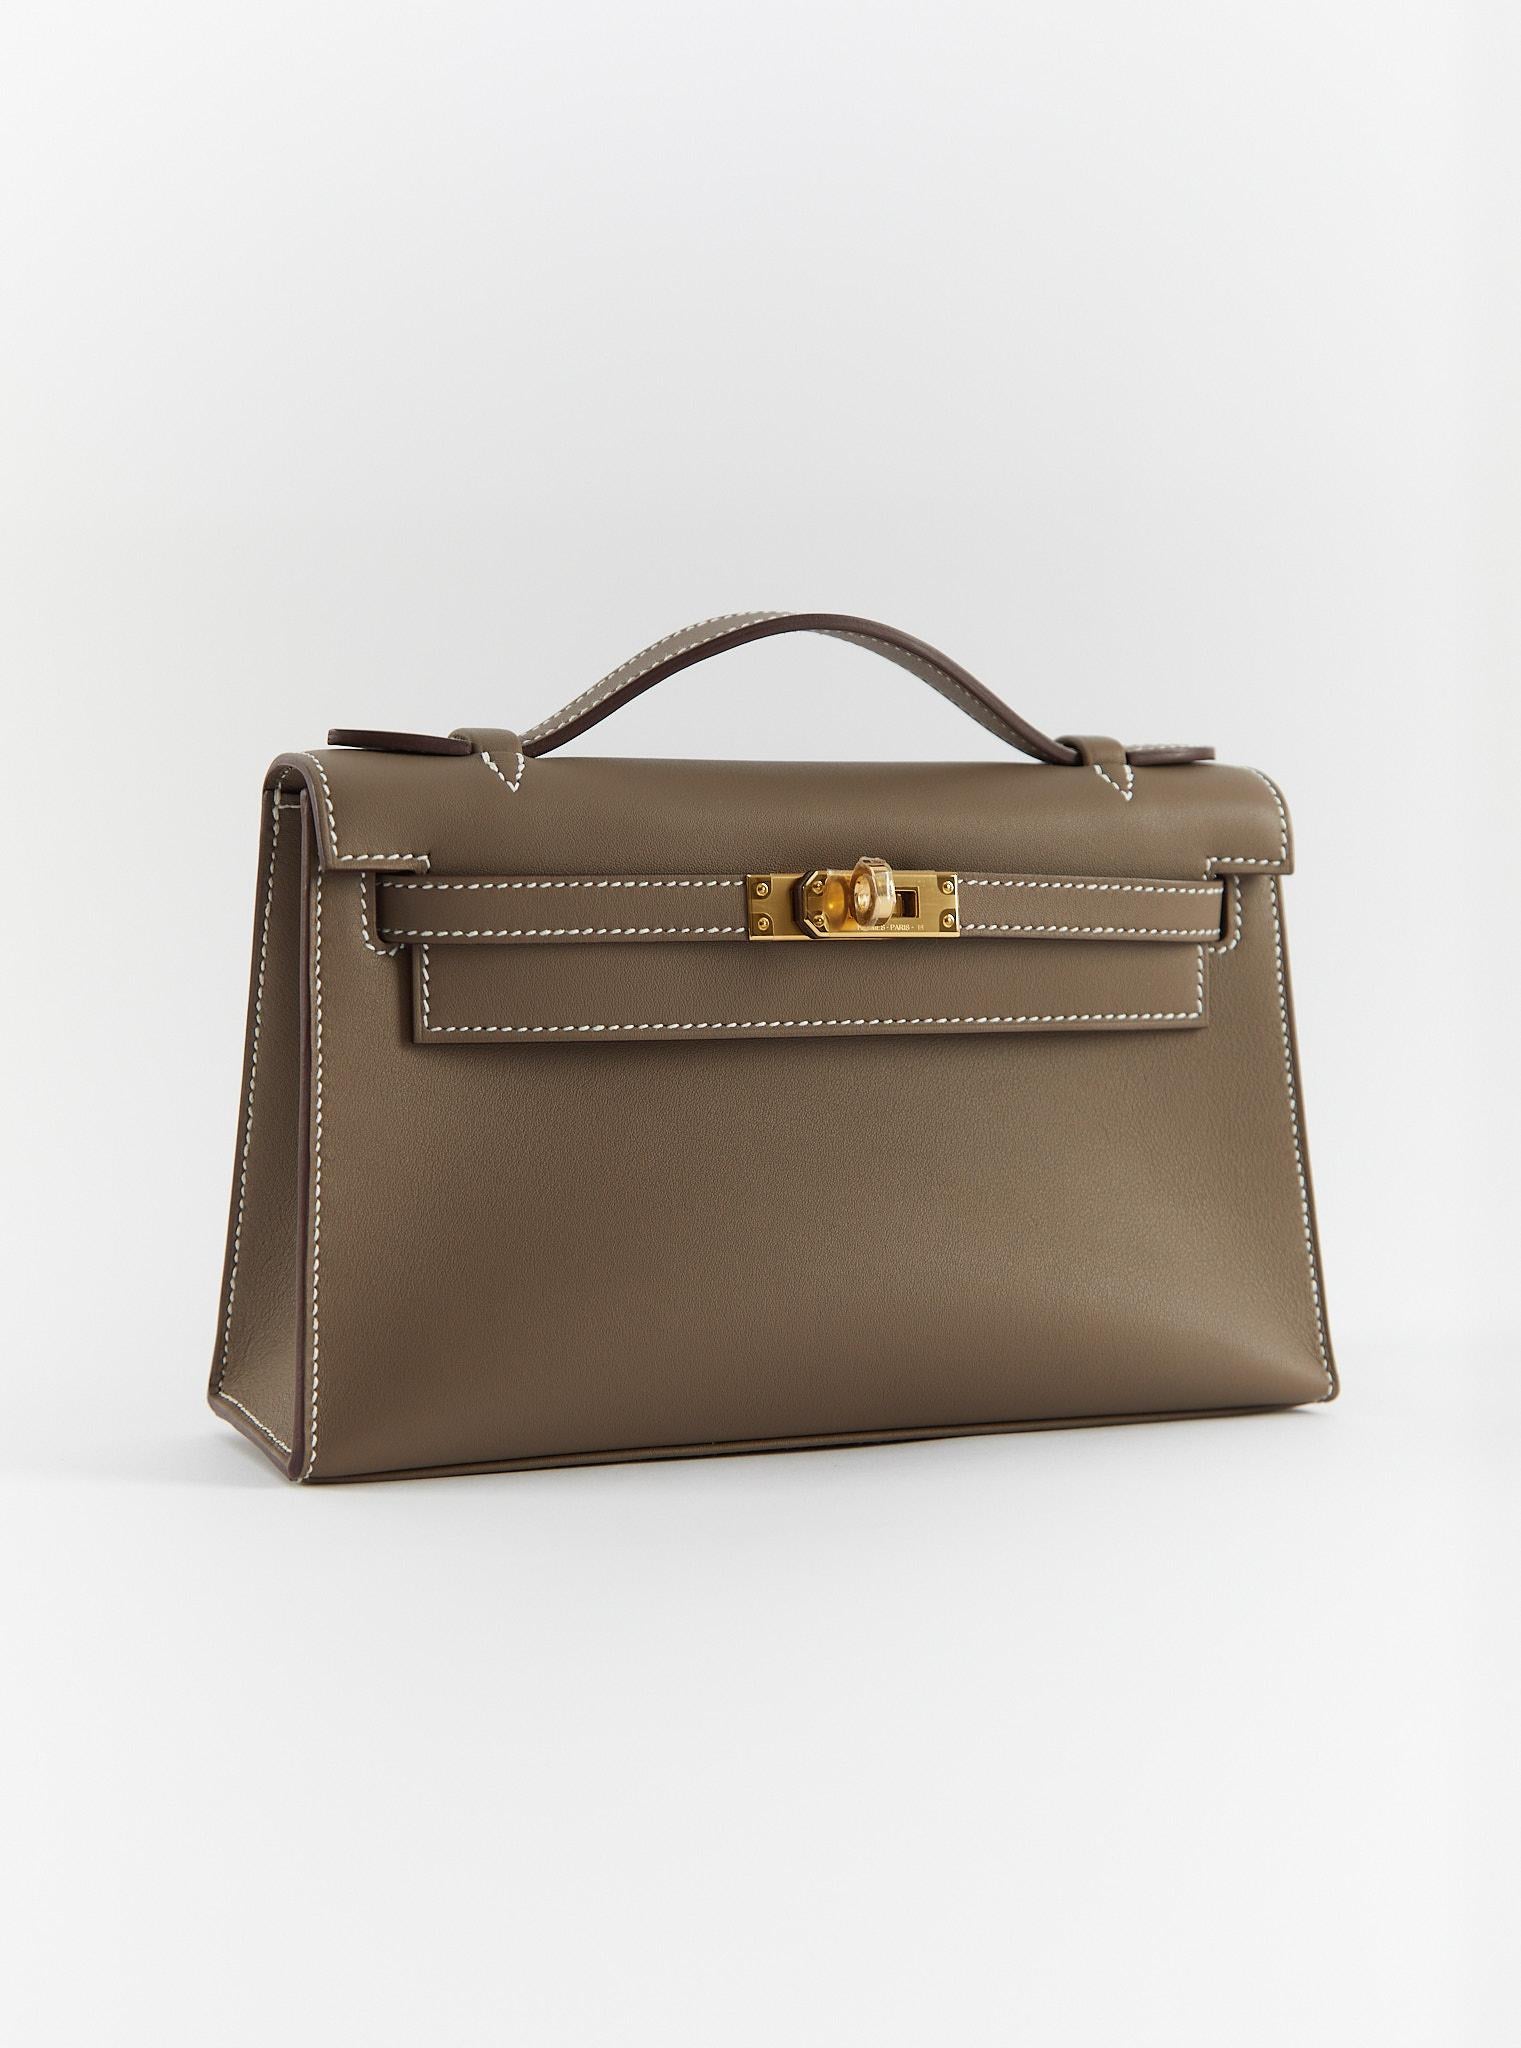 Hermès Kelly Pochette in Etoupe

Swift Leather with Gold Hardware

B Stamp / 2024

Accompanied by: Original receipt, Hermes box, Hermes dustbag, felt, ribbon and care card

Measurements: 8.5